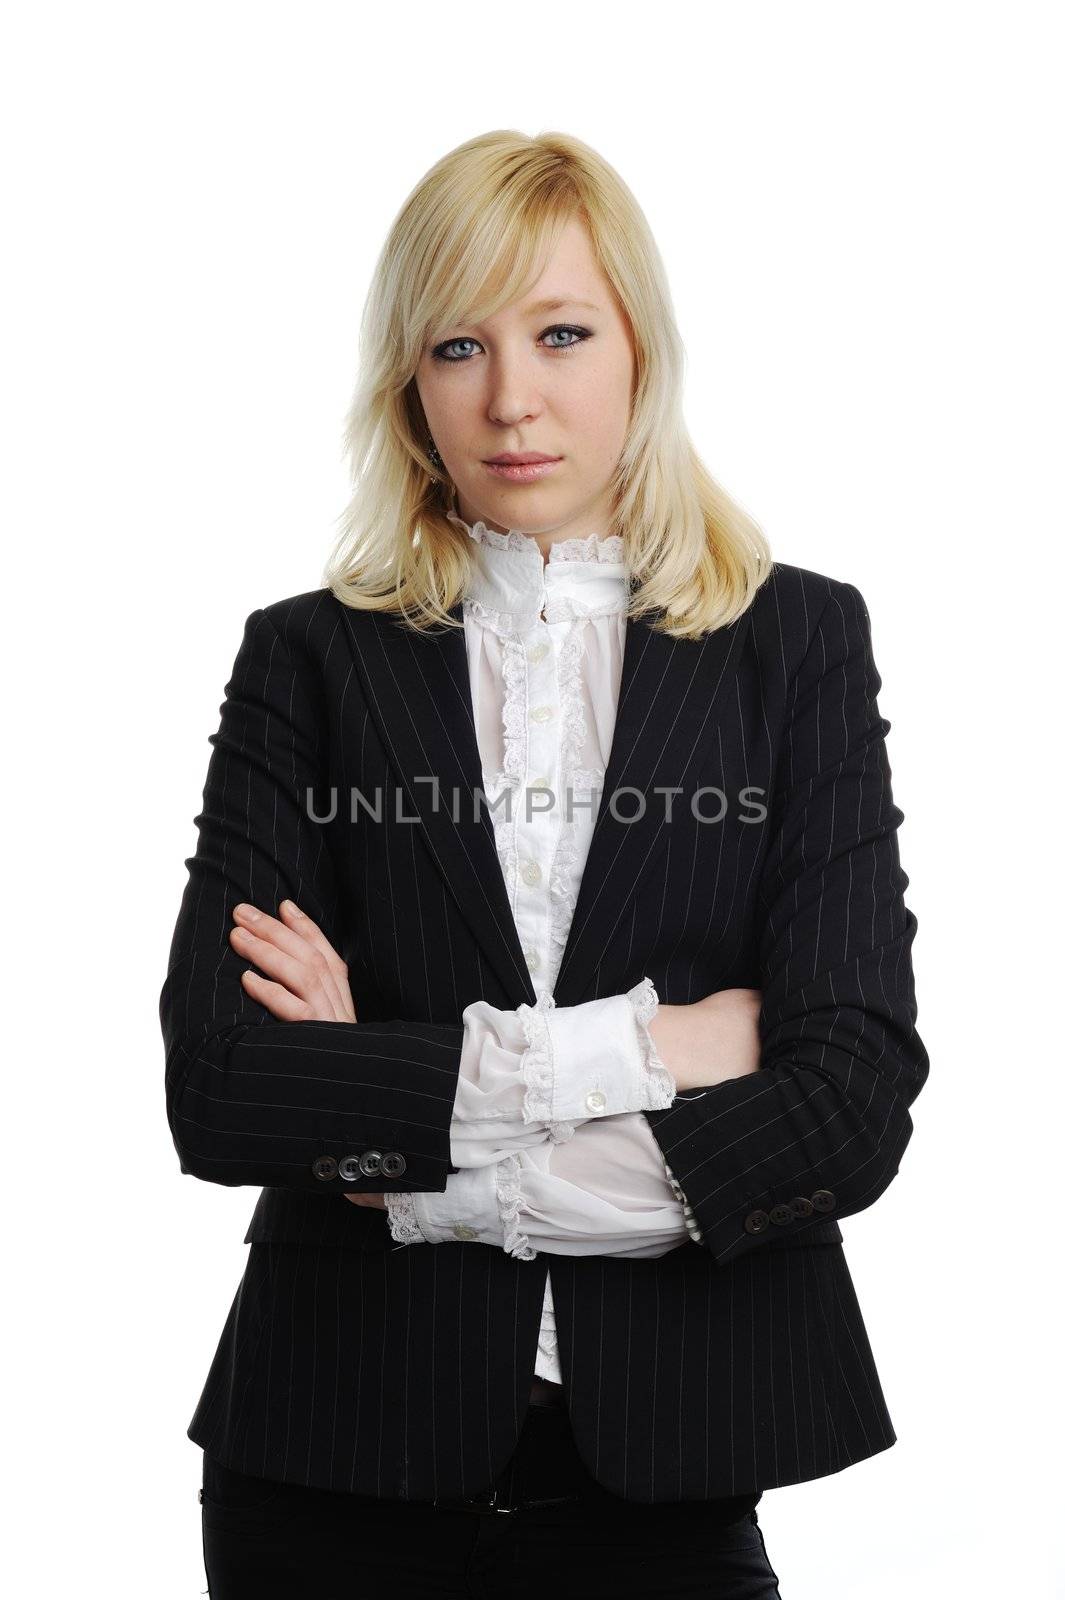 A portrait of a young woman in black suit